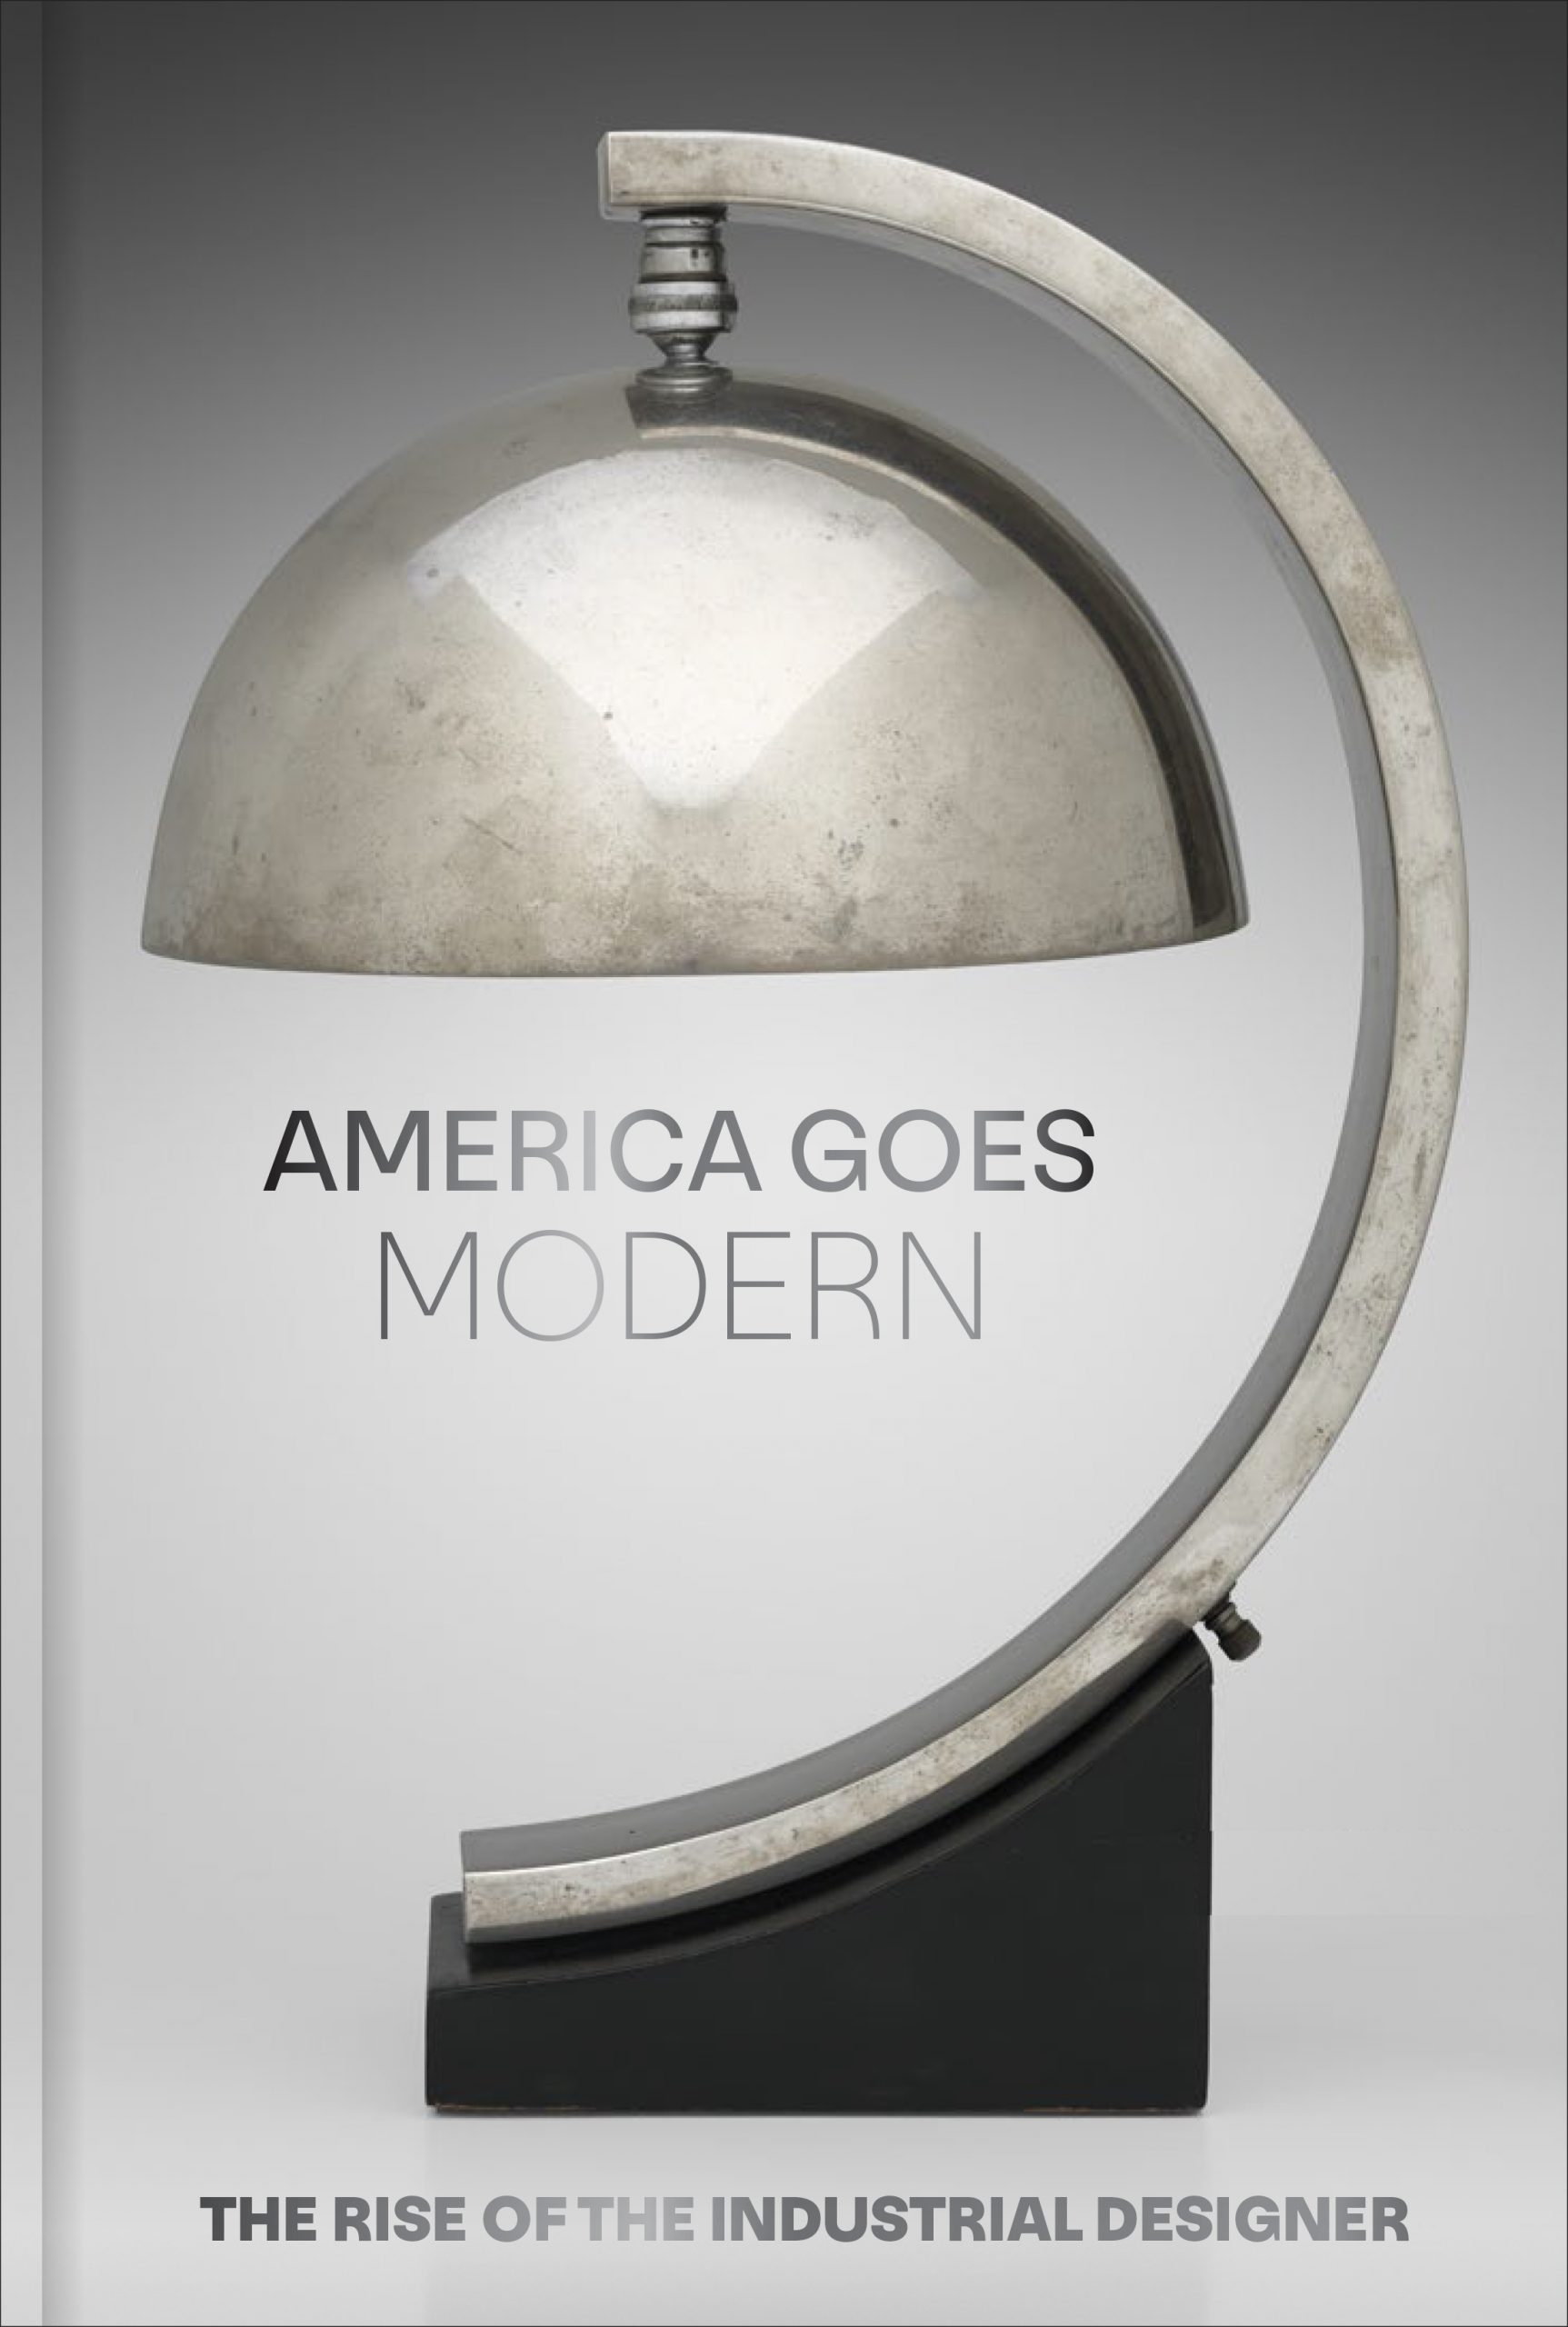 America Goes Modern: The Rise of the Industrial Designer by Nonie Gadsden and Kate Joy, MFA Publications, Museum of Fine Arts, Boston, August 30, 2022